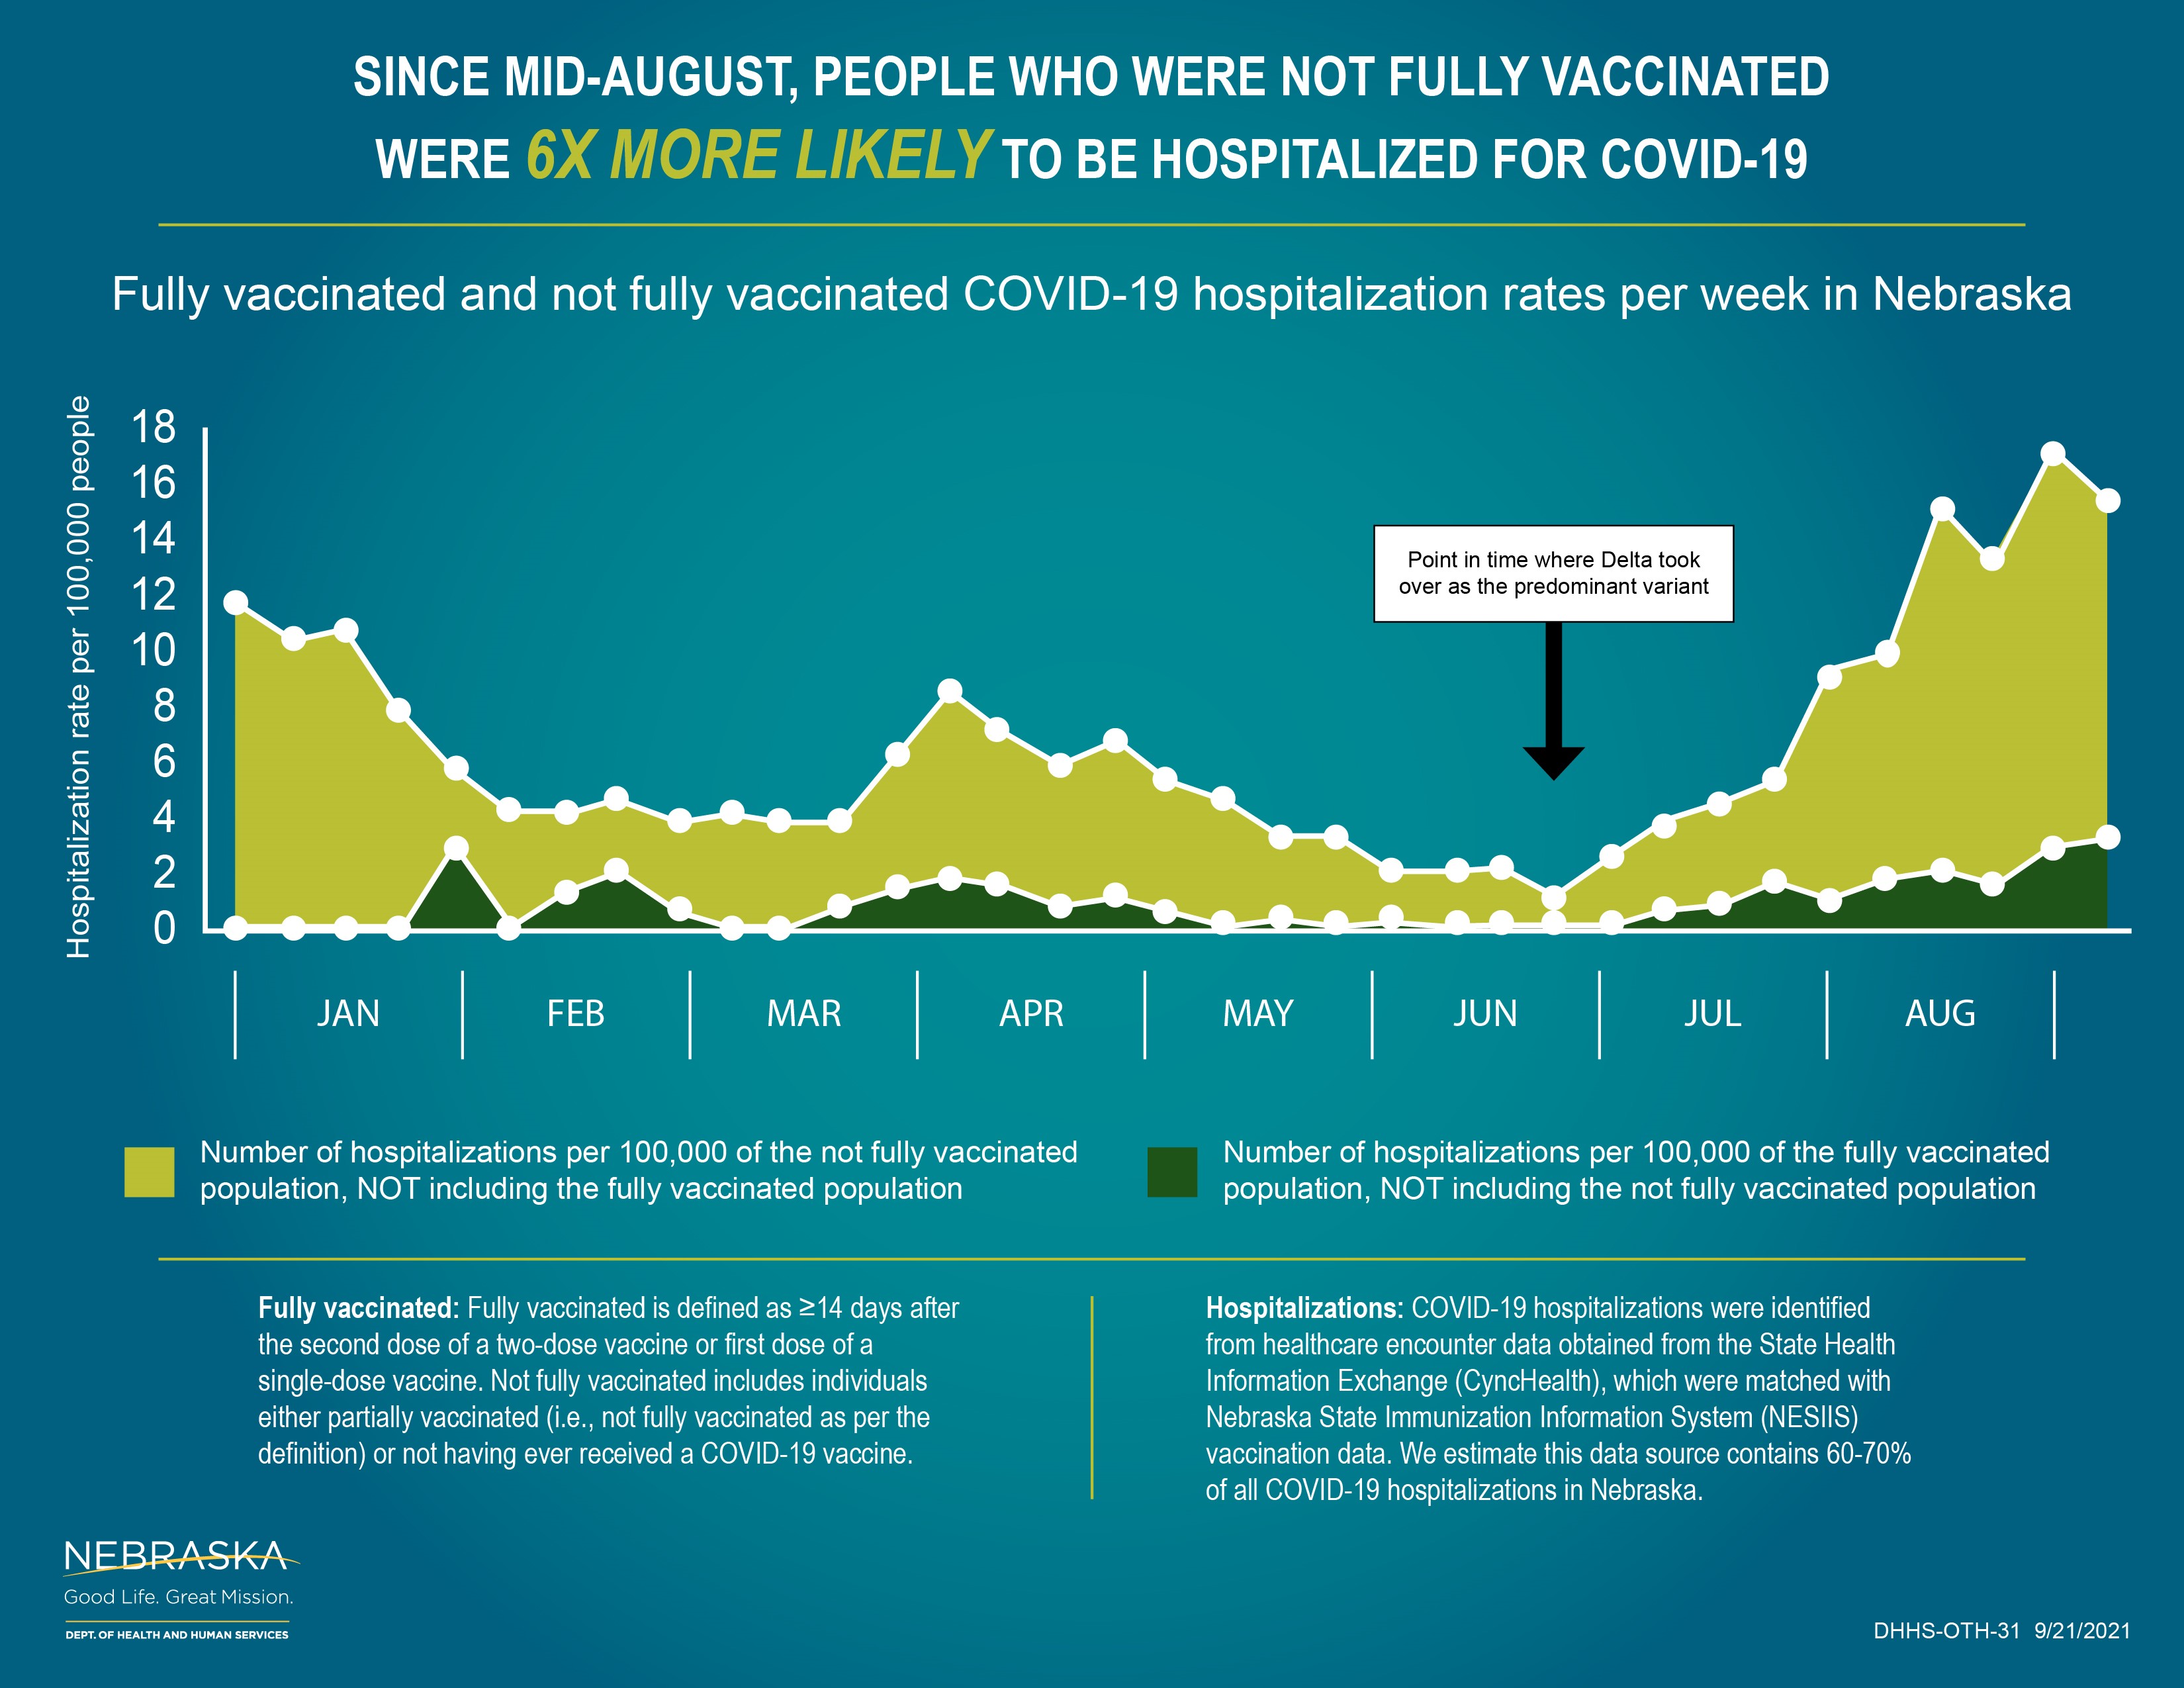 Graph: Since mid-August, people who were not fully vaccinated were 6x more likely to be hospitalized for COVID-19.